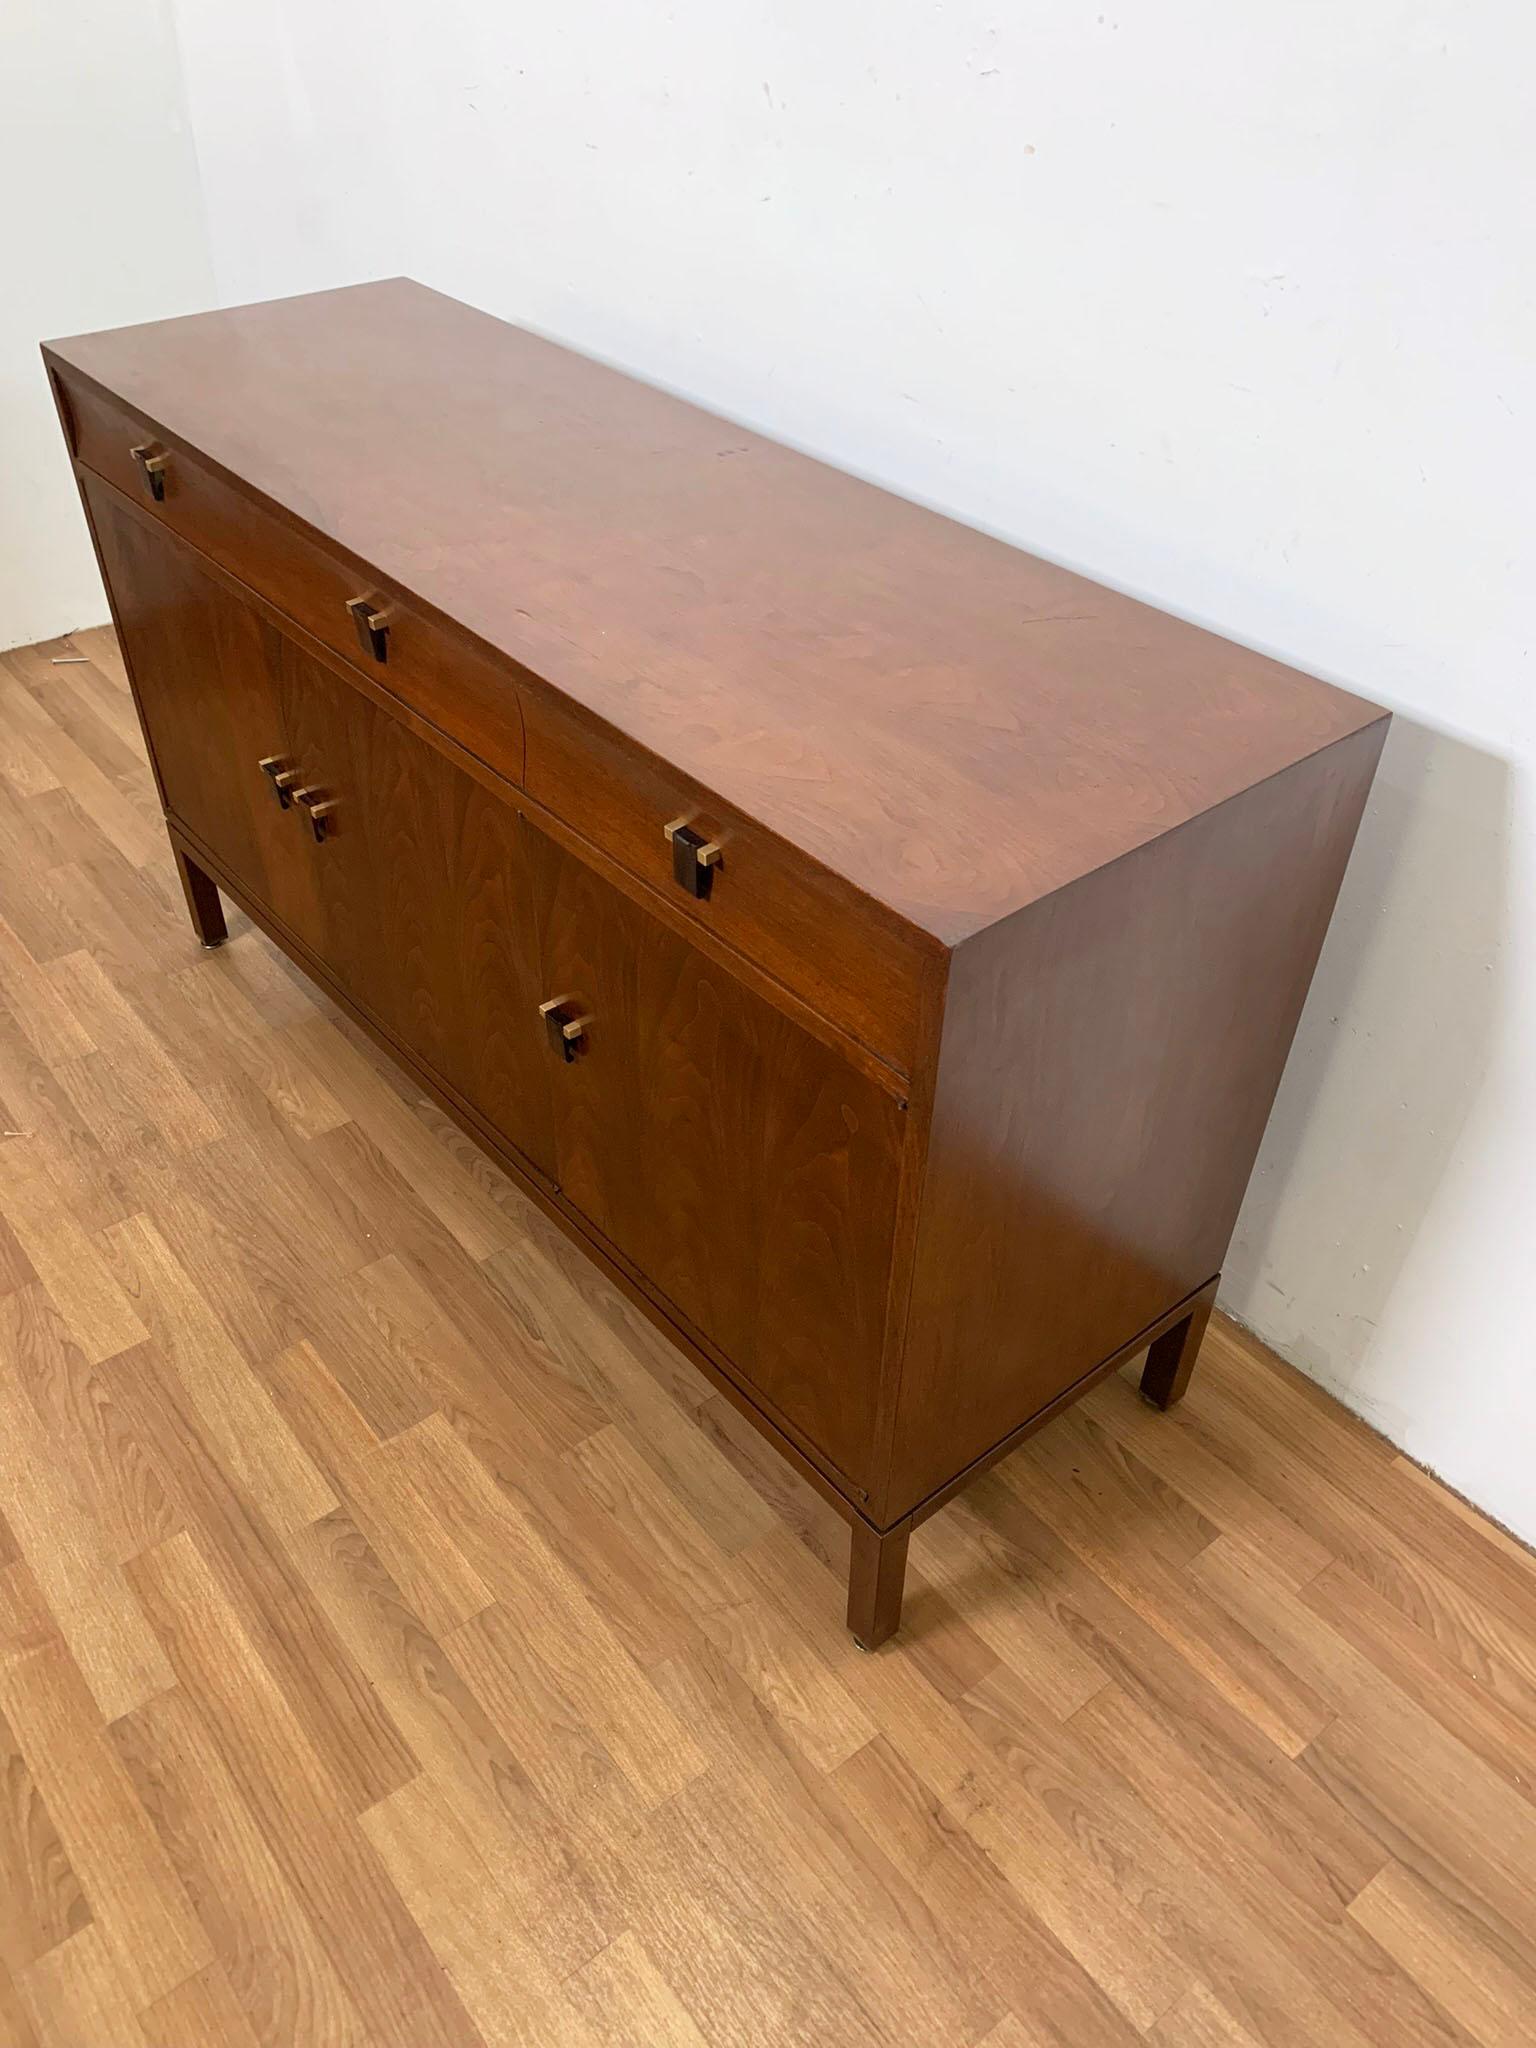 Edward Wormley for Dunbar Mahogany Credenza with Rosewood Pulls, circa 1950s For Sale 4